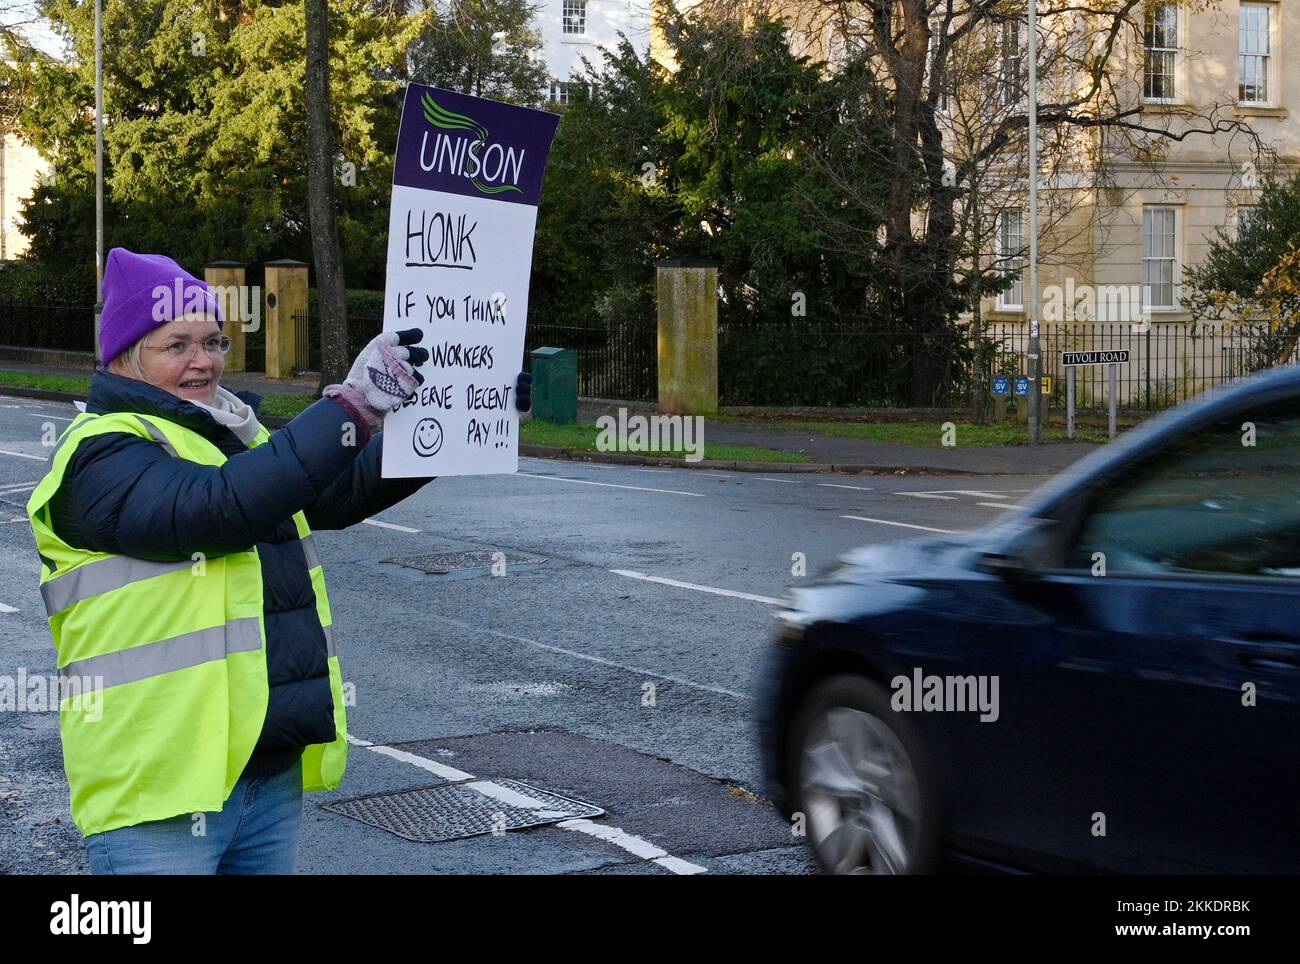 Cheltenham, UK. 25th Nov, 2022. 25th November 2022. Cheltenham, UK. A protester waves a sign at an oncoming car outside of Park Campus, part of the University of Gloucestershire. The University and College Lecturers Union have begun industrial action on the grounds of pay and conditions in a dispute expected to last well into 2023. (Annabel Lee-Ellis/Pathos) Credit: Pathos Images/Alamy Live News Stock Photo